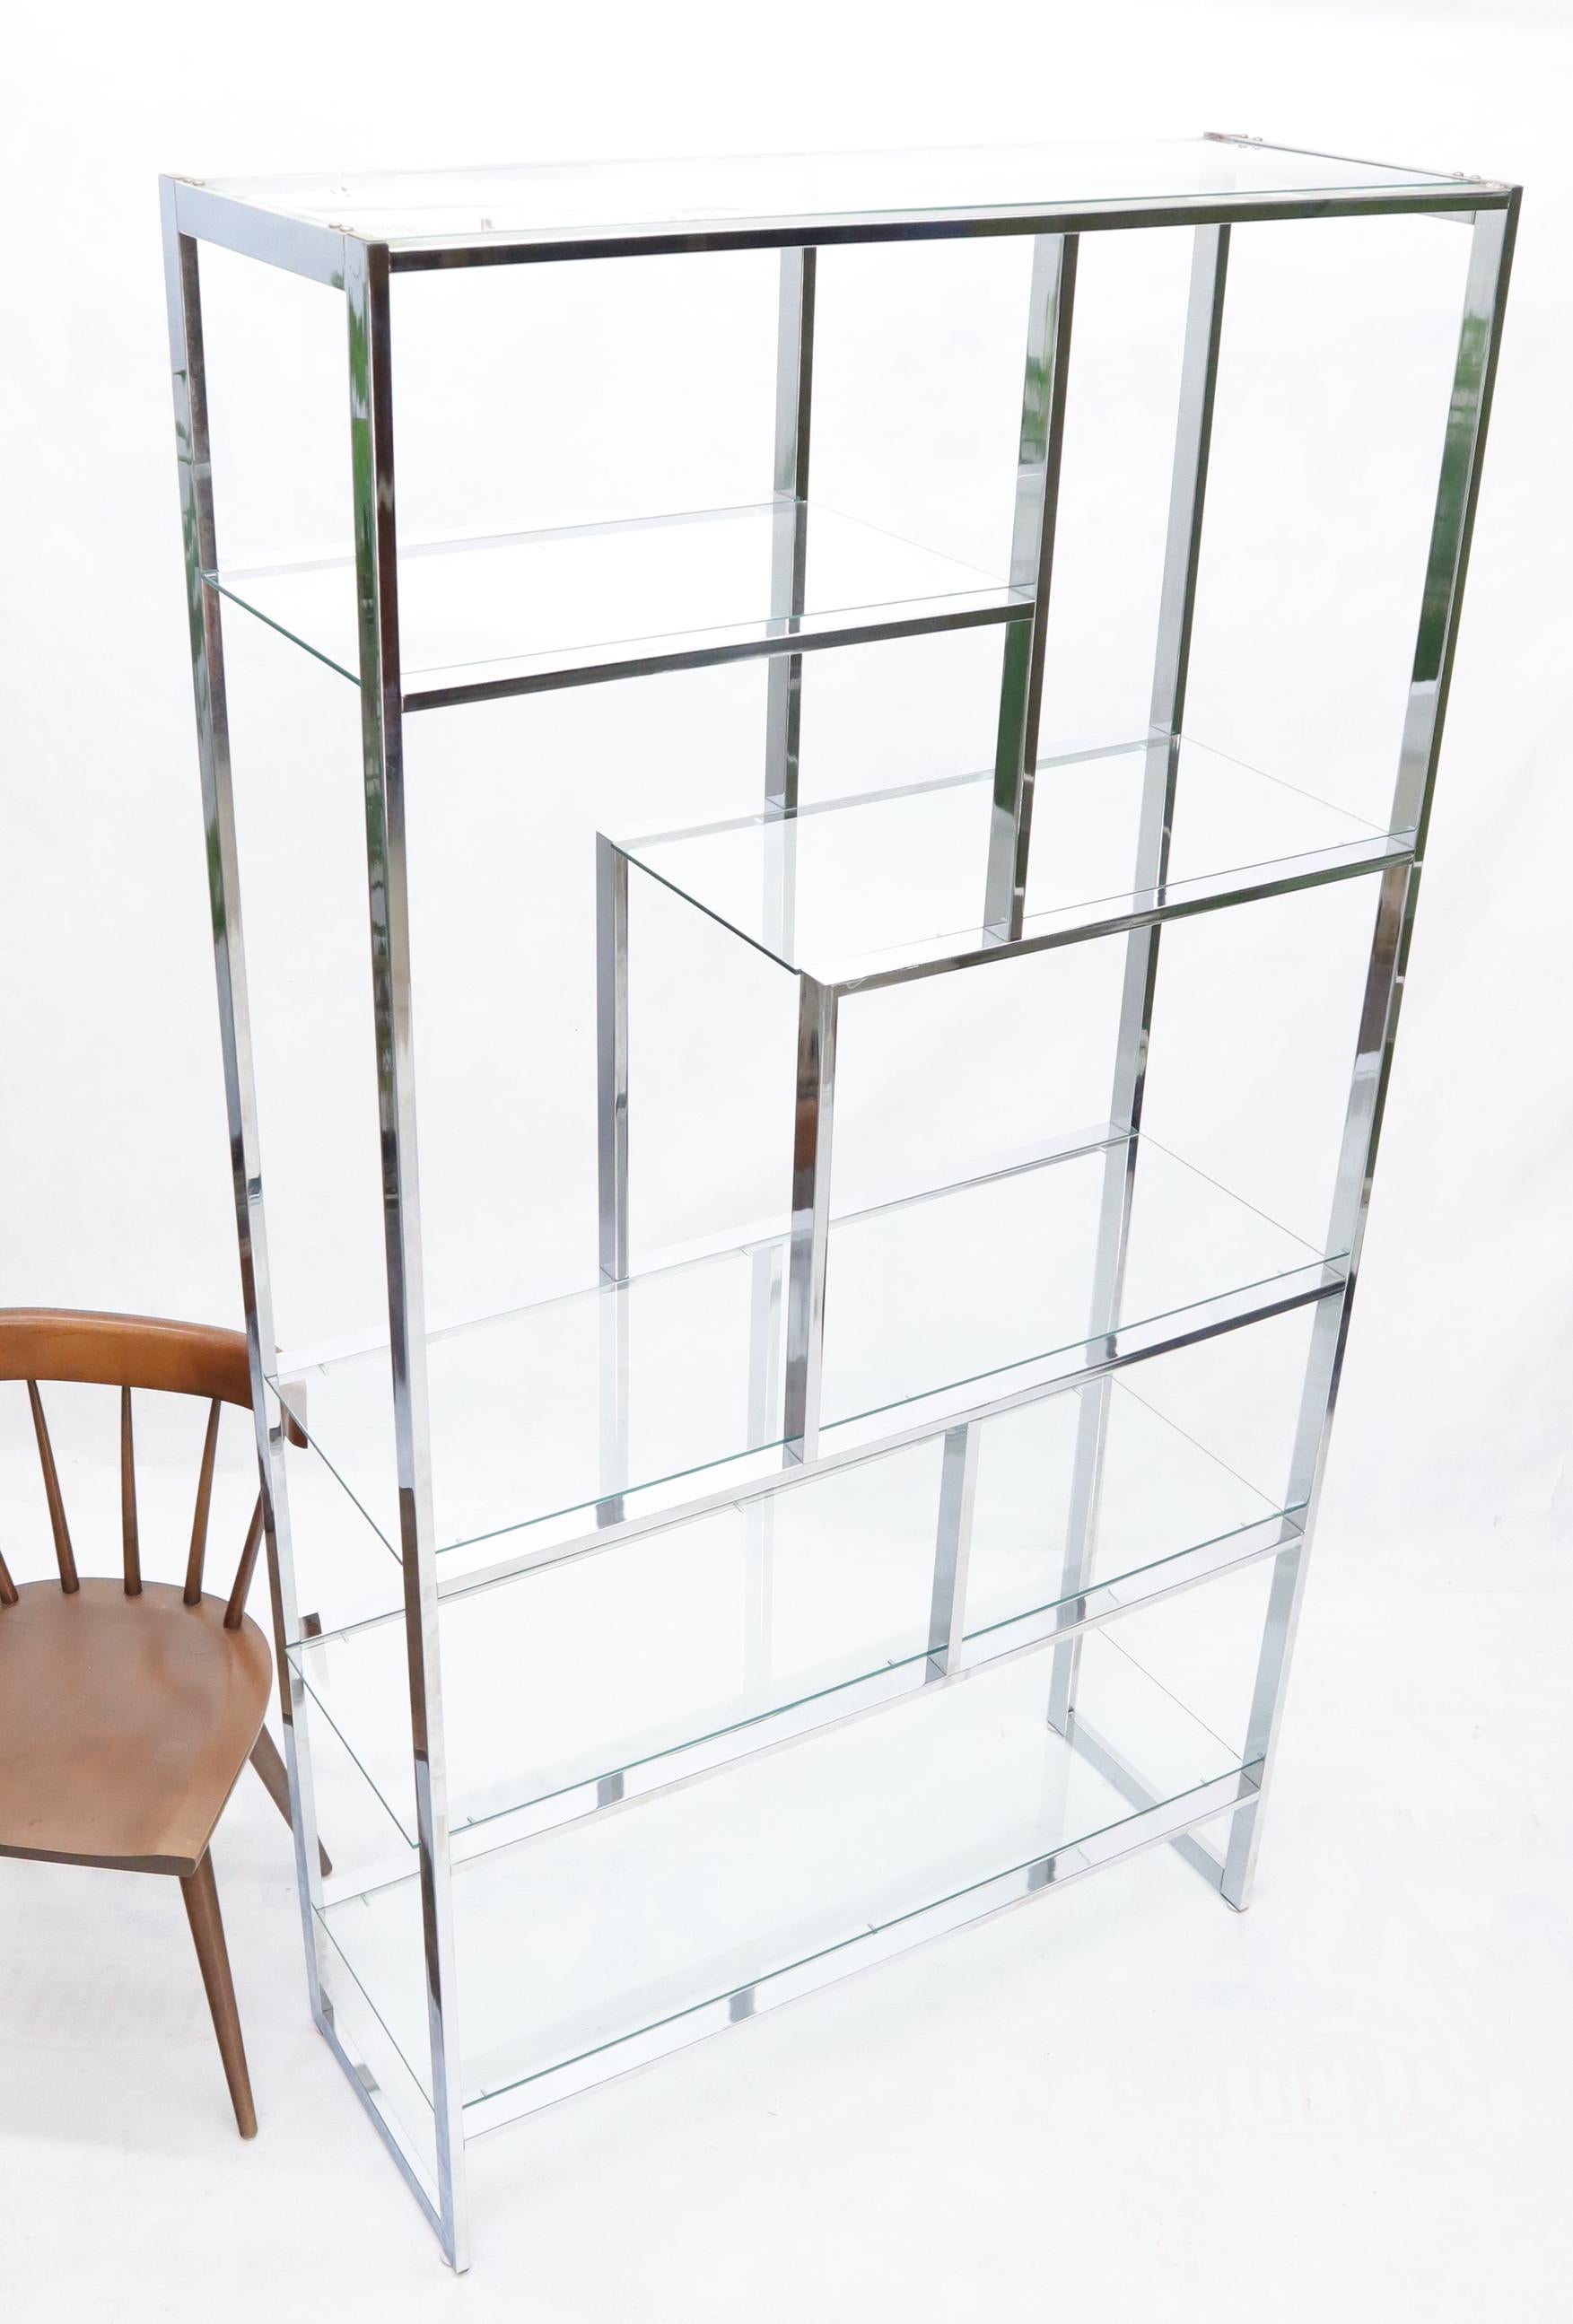 Mid-Century Modern large chrome and glass étagère shelving wall unit.